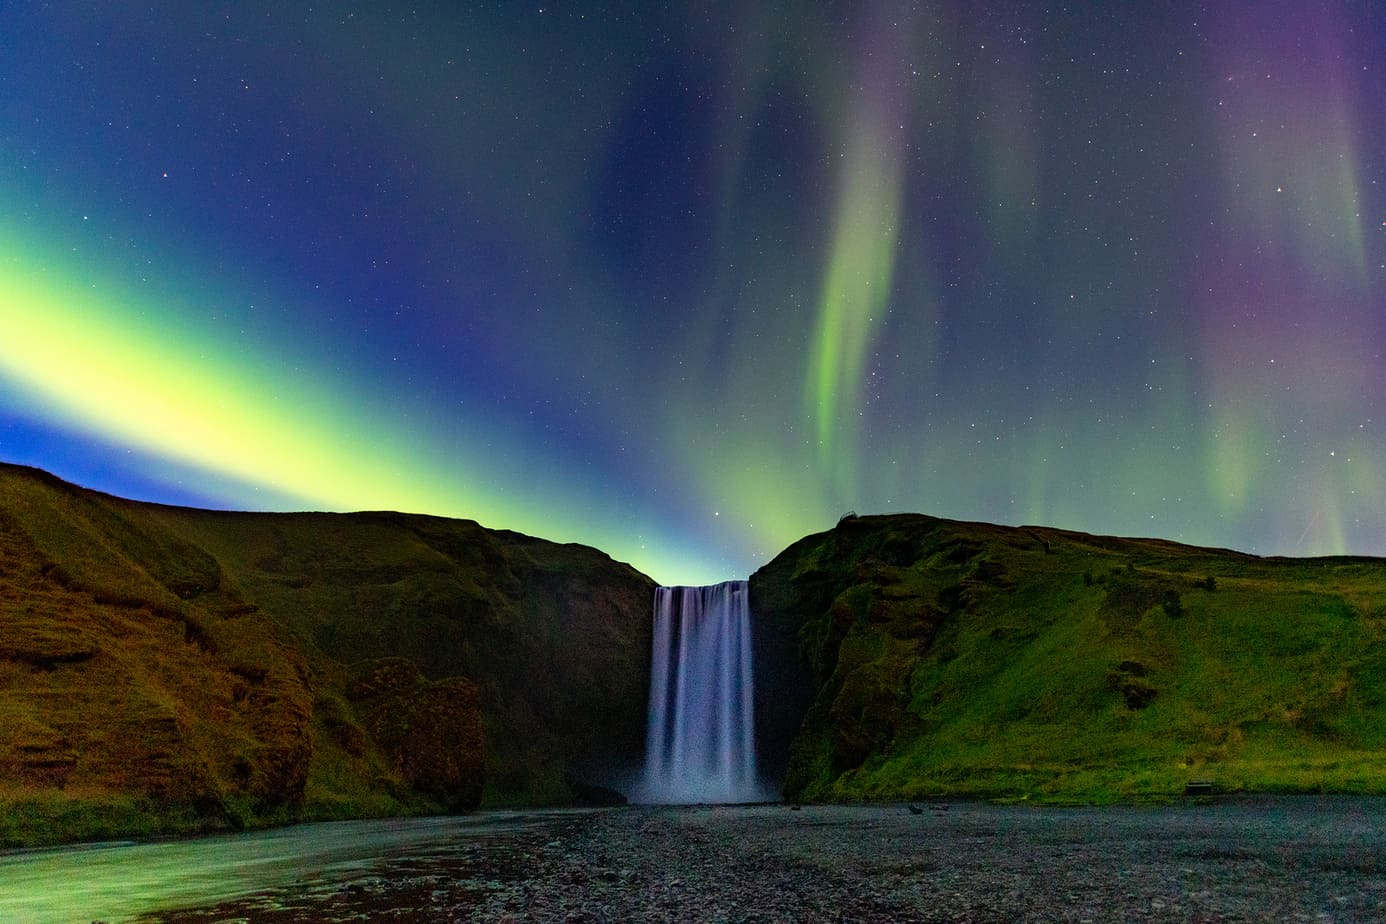 A waterfall cascades down into a pool of water under the Northern Lights.